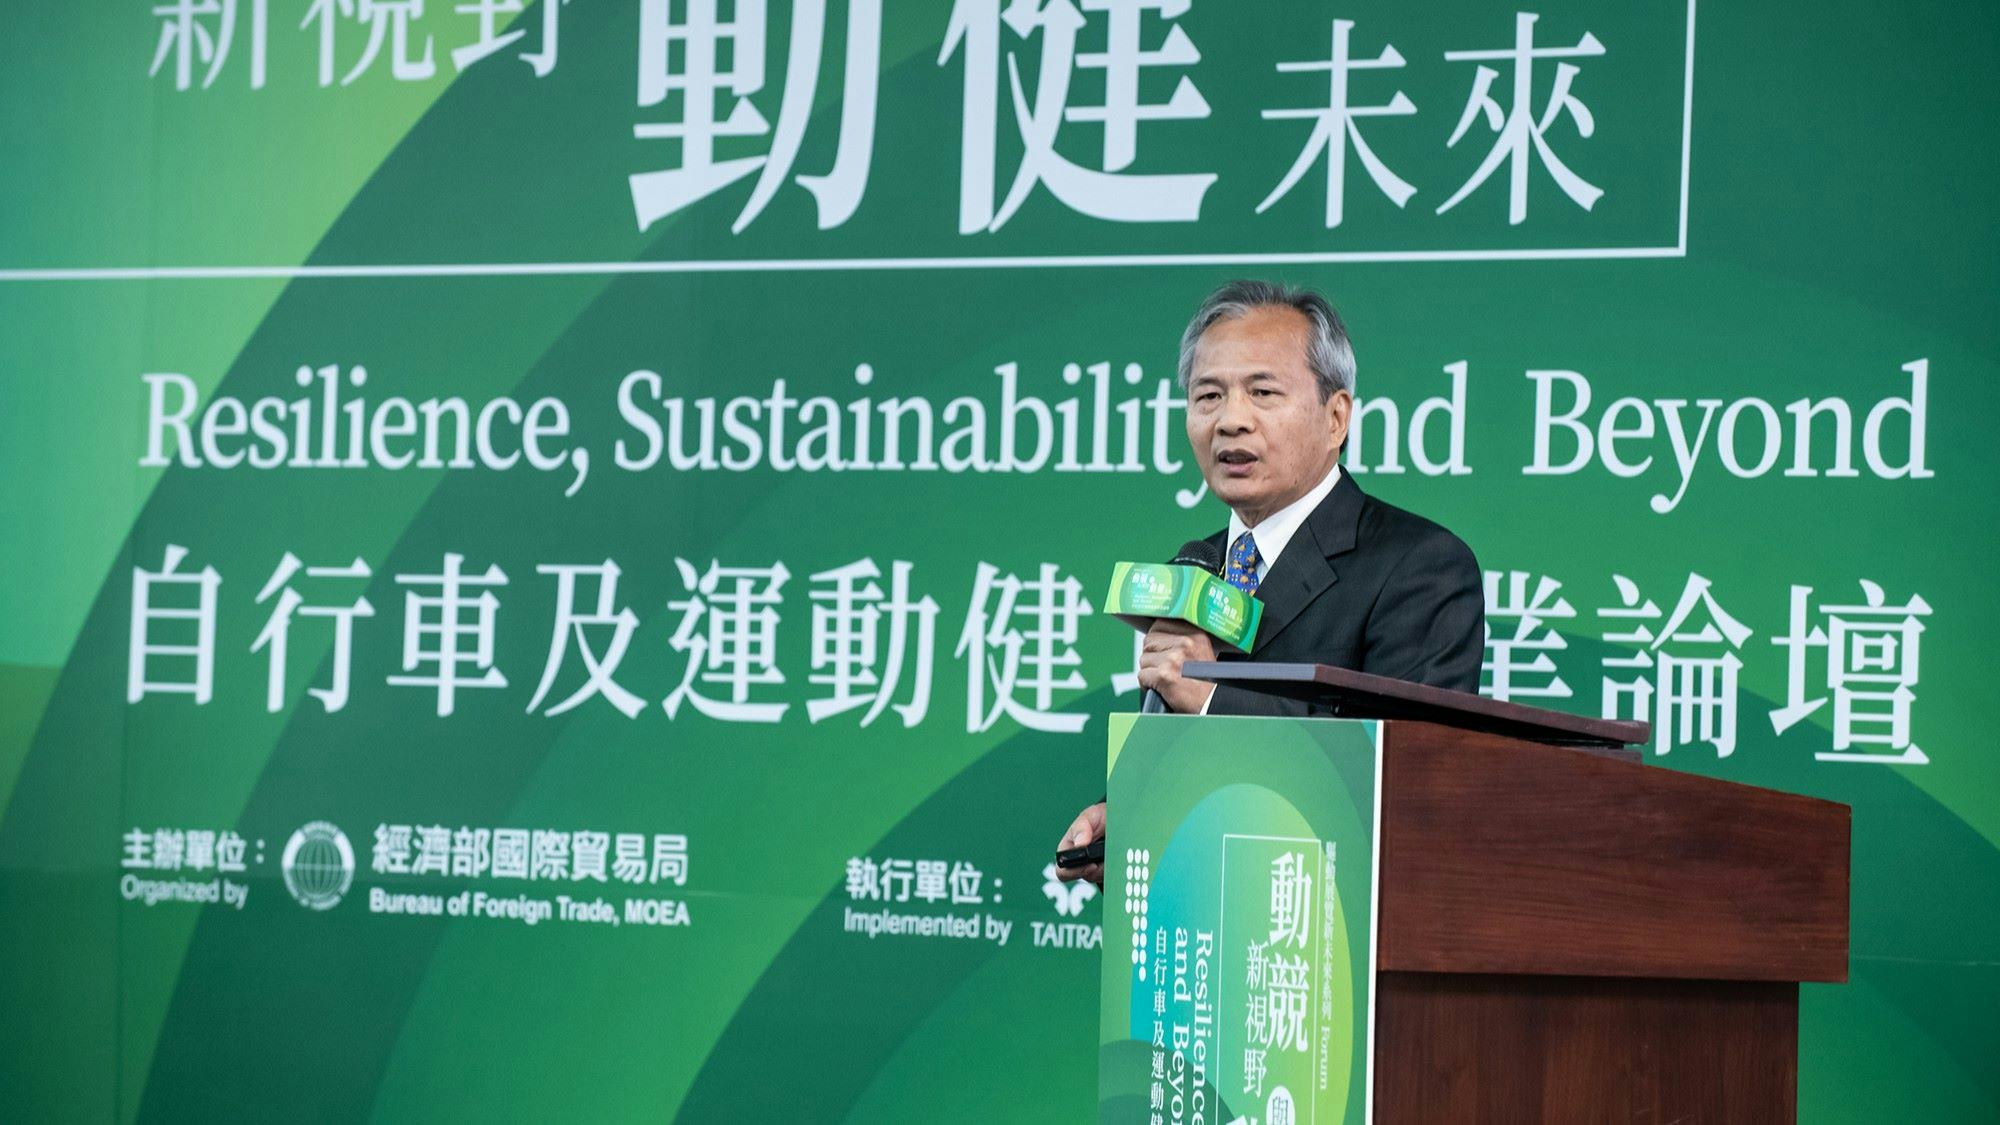 The Taipei International Cycle Show put its focus on sustainability and other ESG topics. – Photo TAITRA